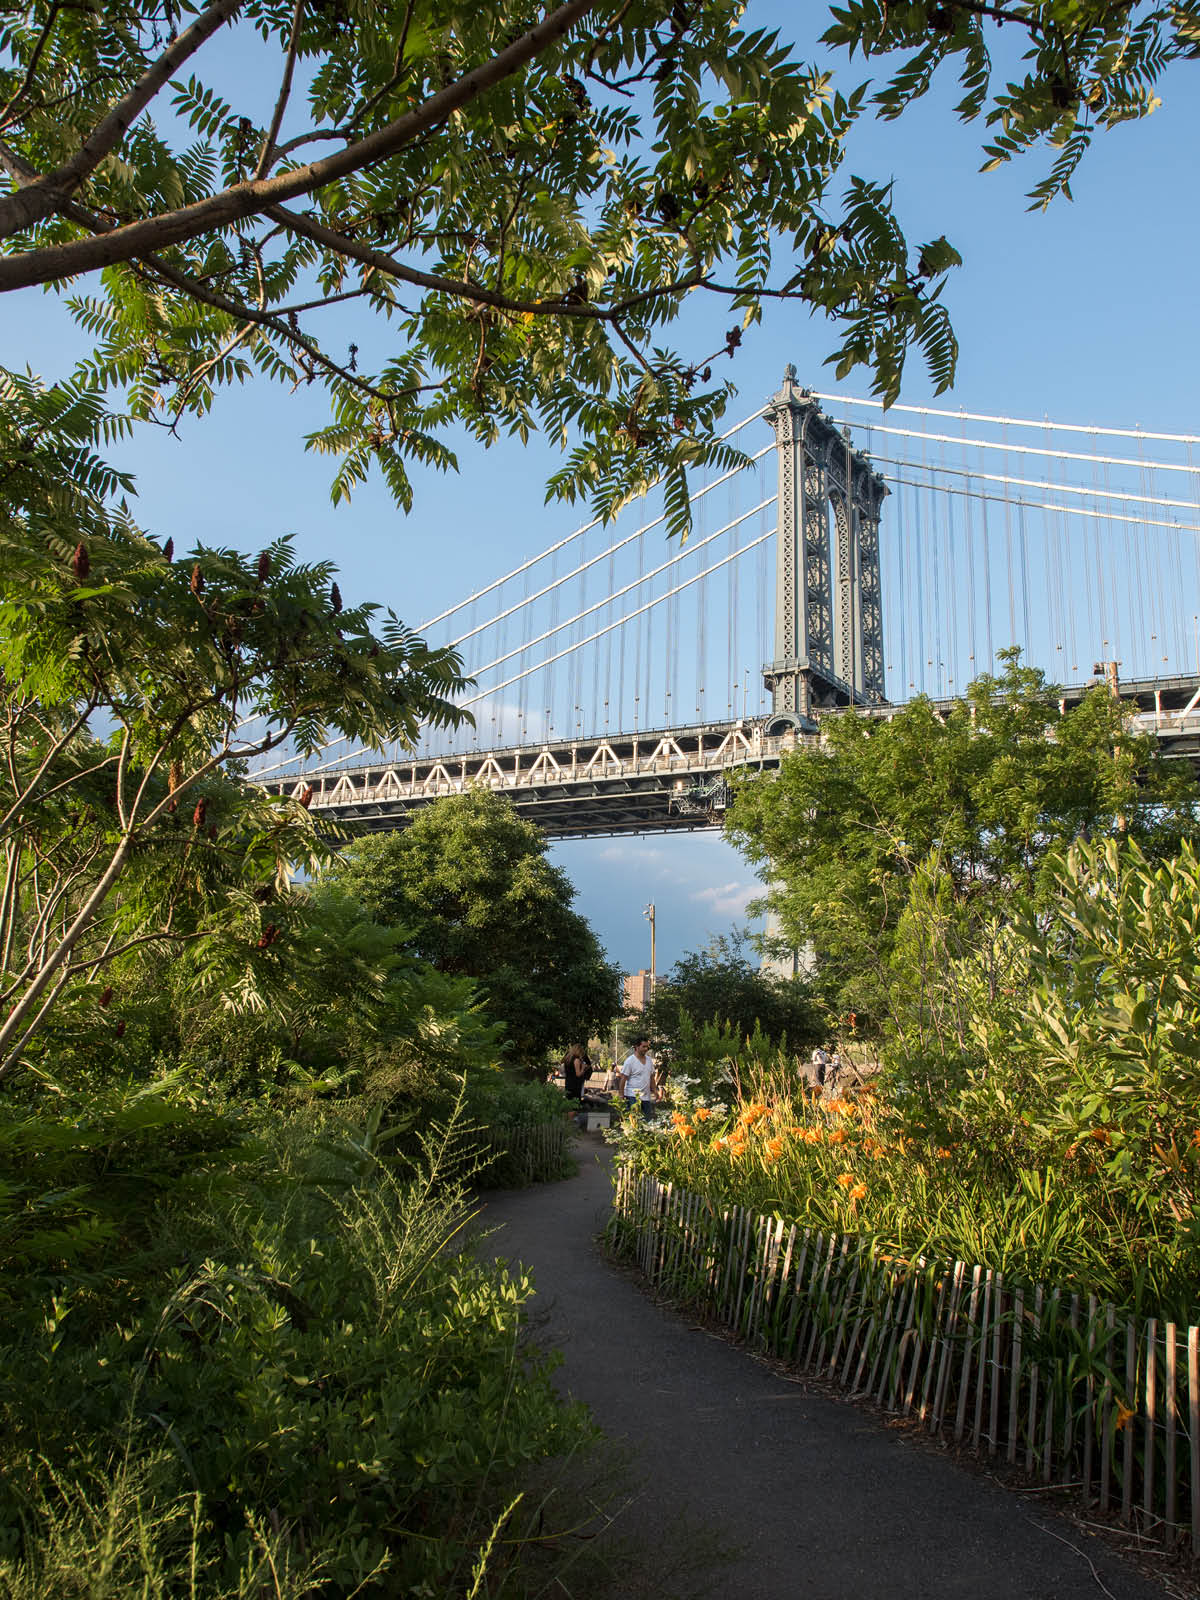 Pathway surrounded by trees and flowers with the Manhattan bridge overhead at sunset.